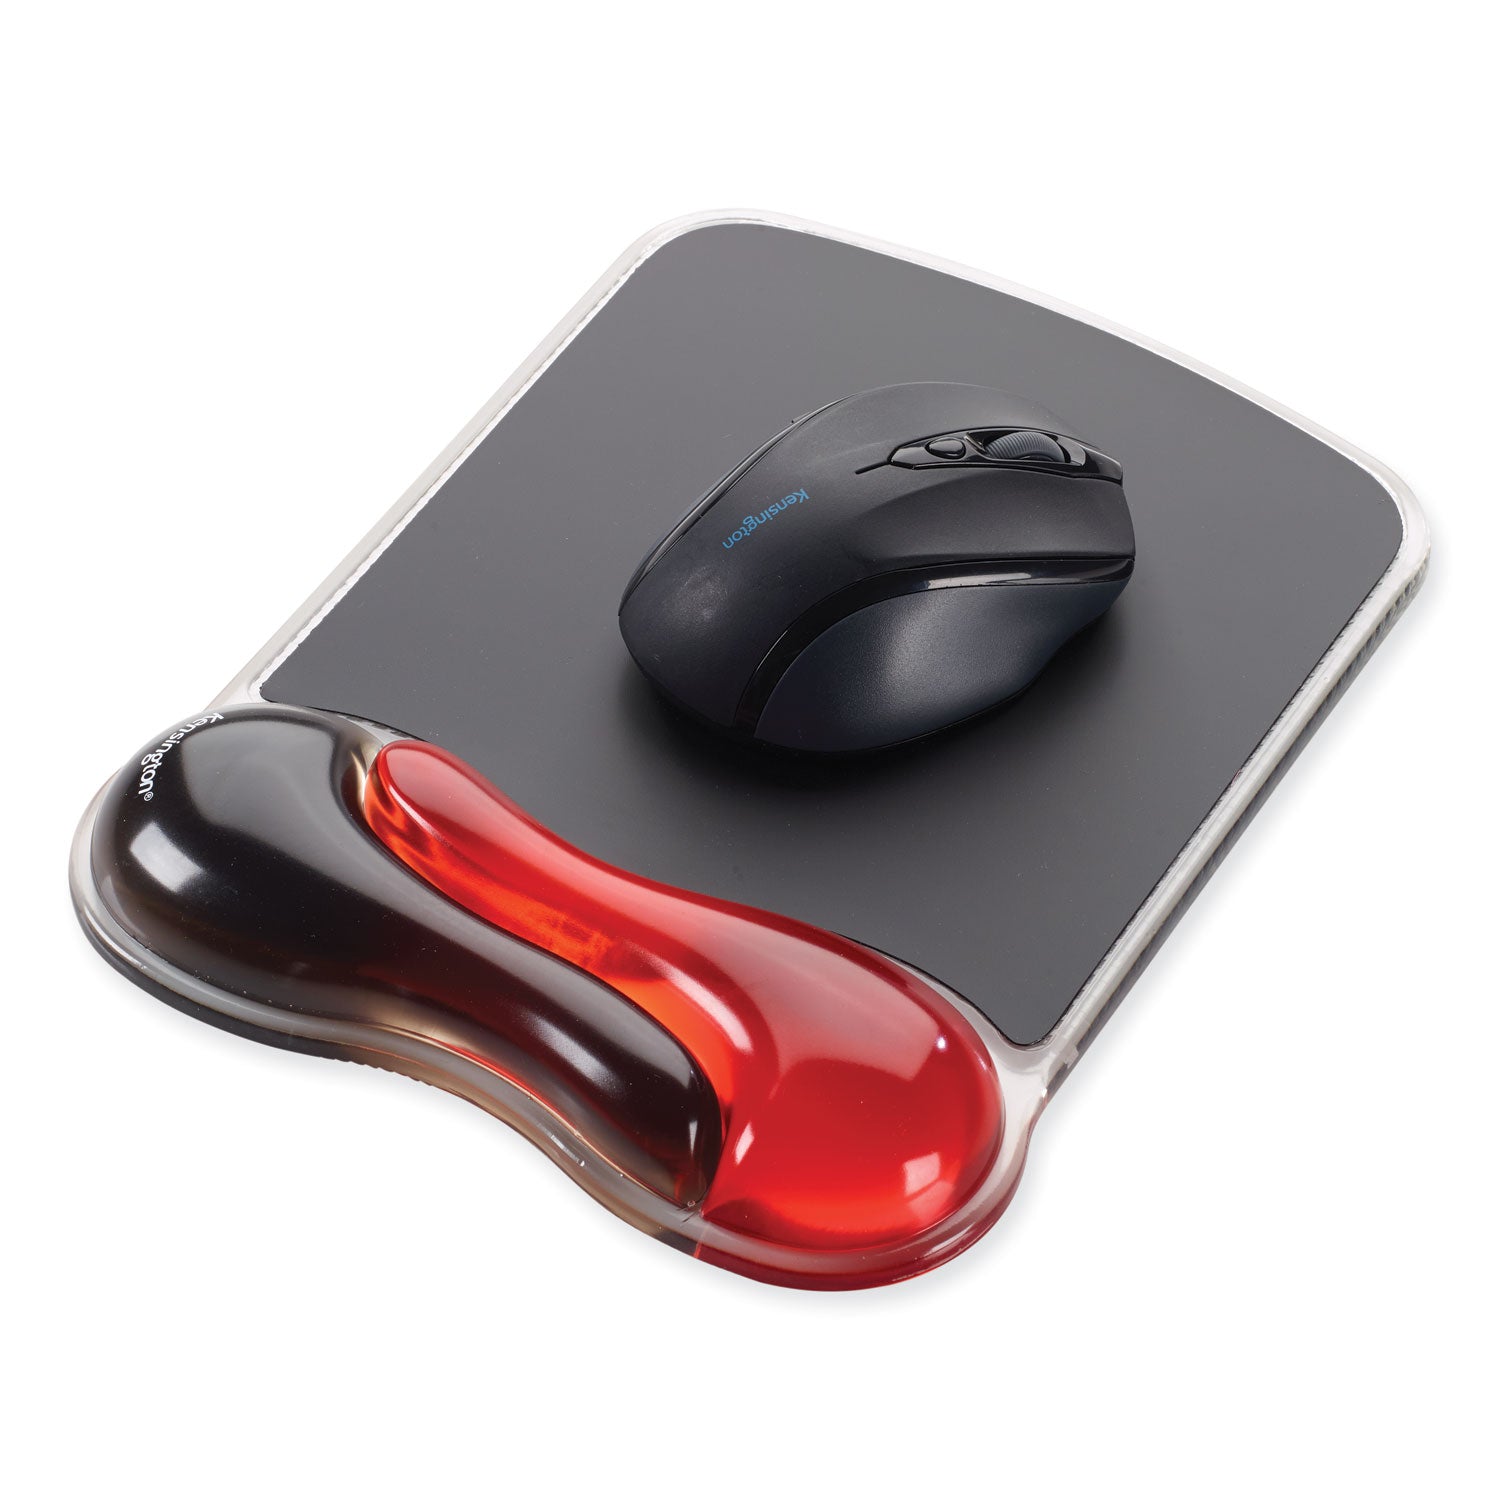 Duo Gel Wave Mouse Pad with Wrist Rest, 9.37 x 13, Red - 